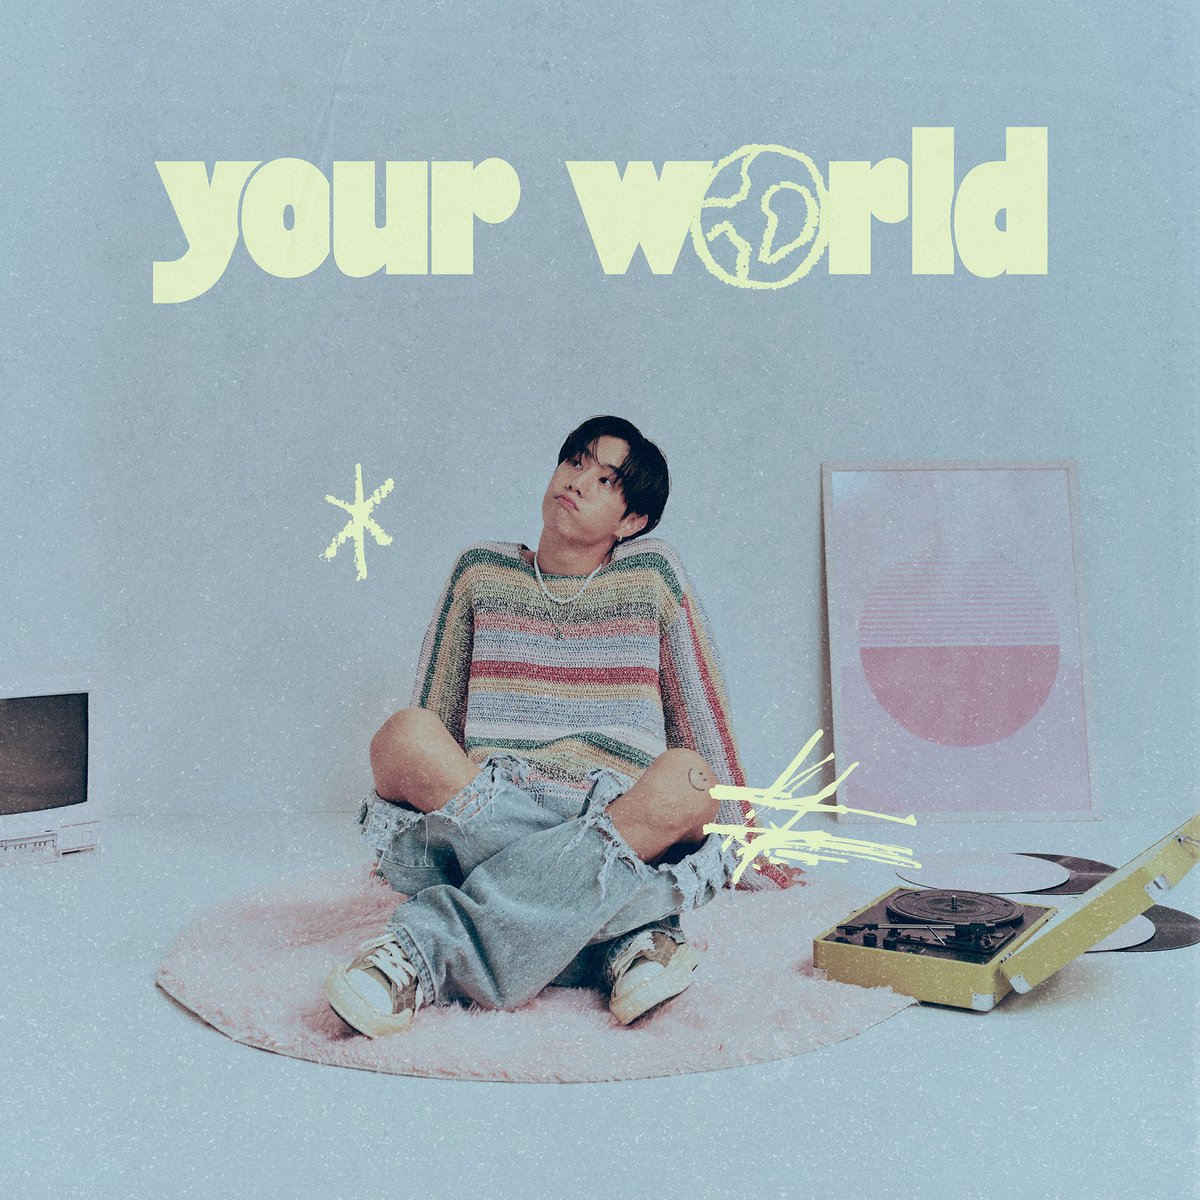 Cuz this is ur world and we're all just... 🌍 Your World 29 SEPT 12AM ET Pre-Save now: marktuan.link/YourWorld #YourWorld #MarkTuan #Mark #마크 #段宜恩 @marktuan